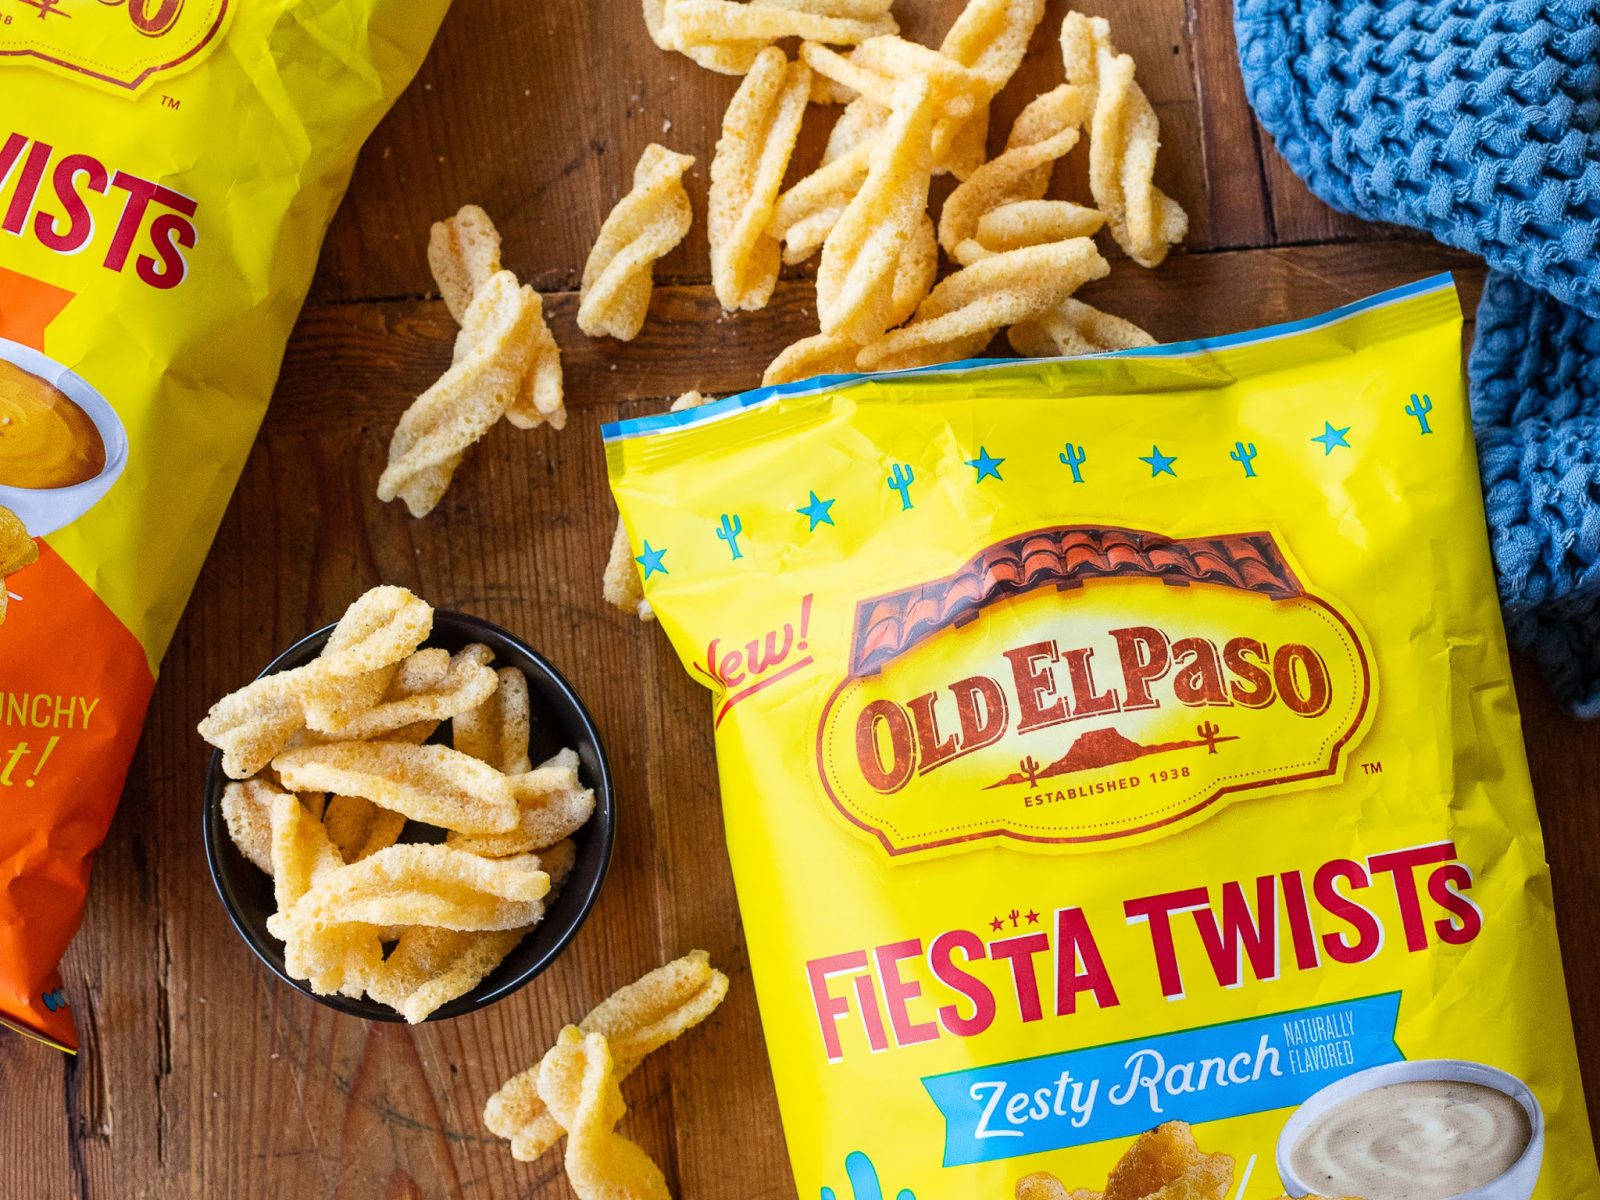 Old El Paso Fiesta Twists Are Now As Low As $1.19 At Kroger